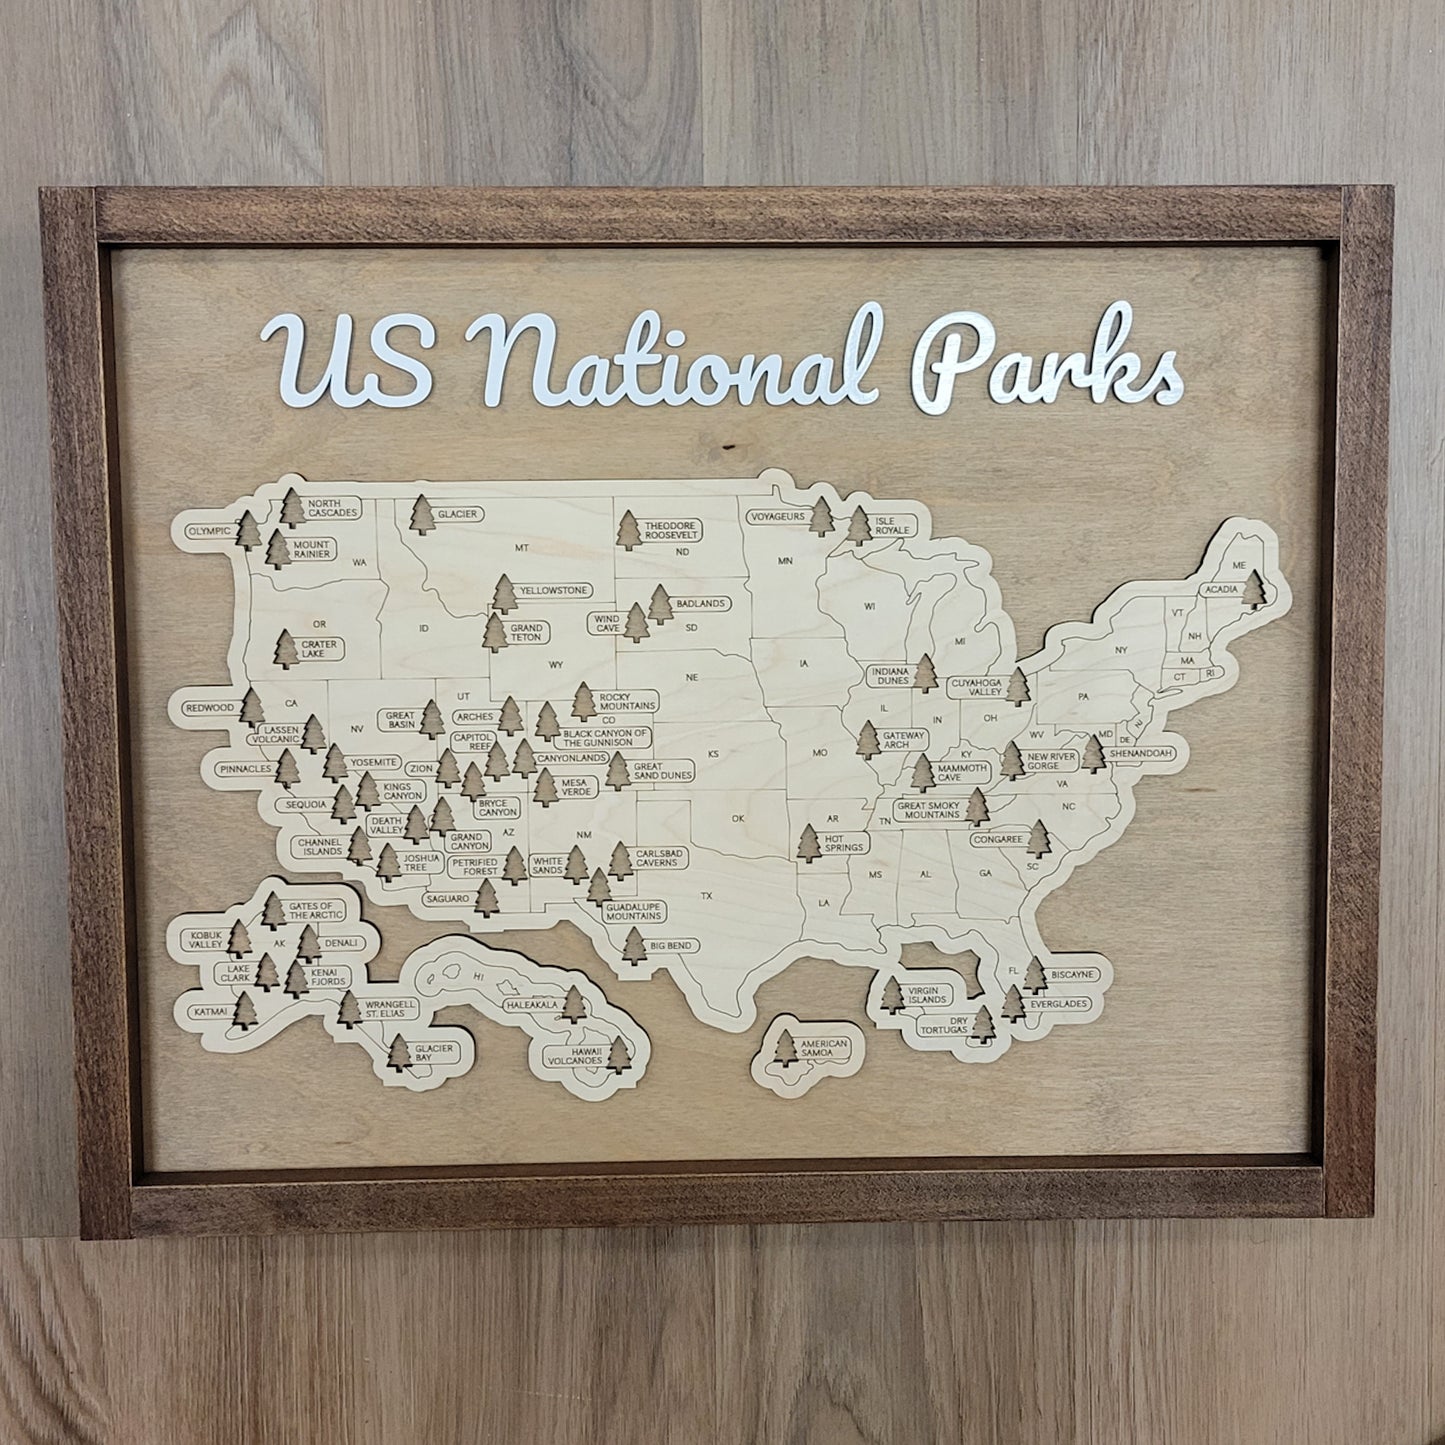 US National Parks Tracker Map - 16x20